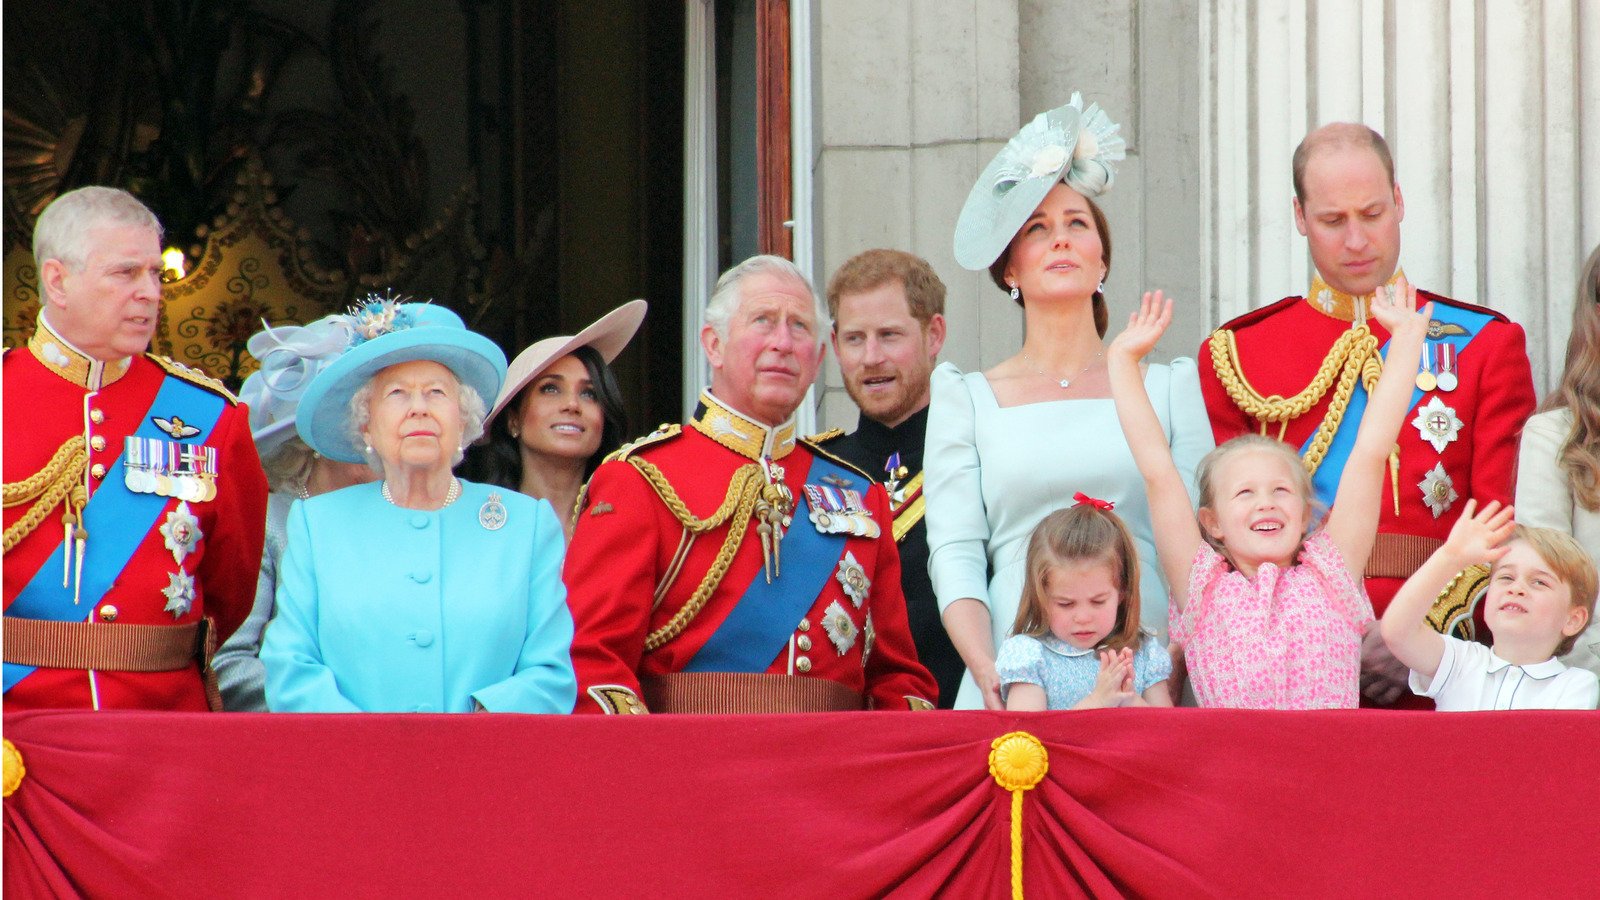 Royals You Wouldn't Want To Meet In Real Life